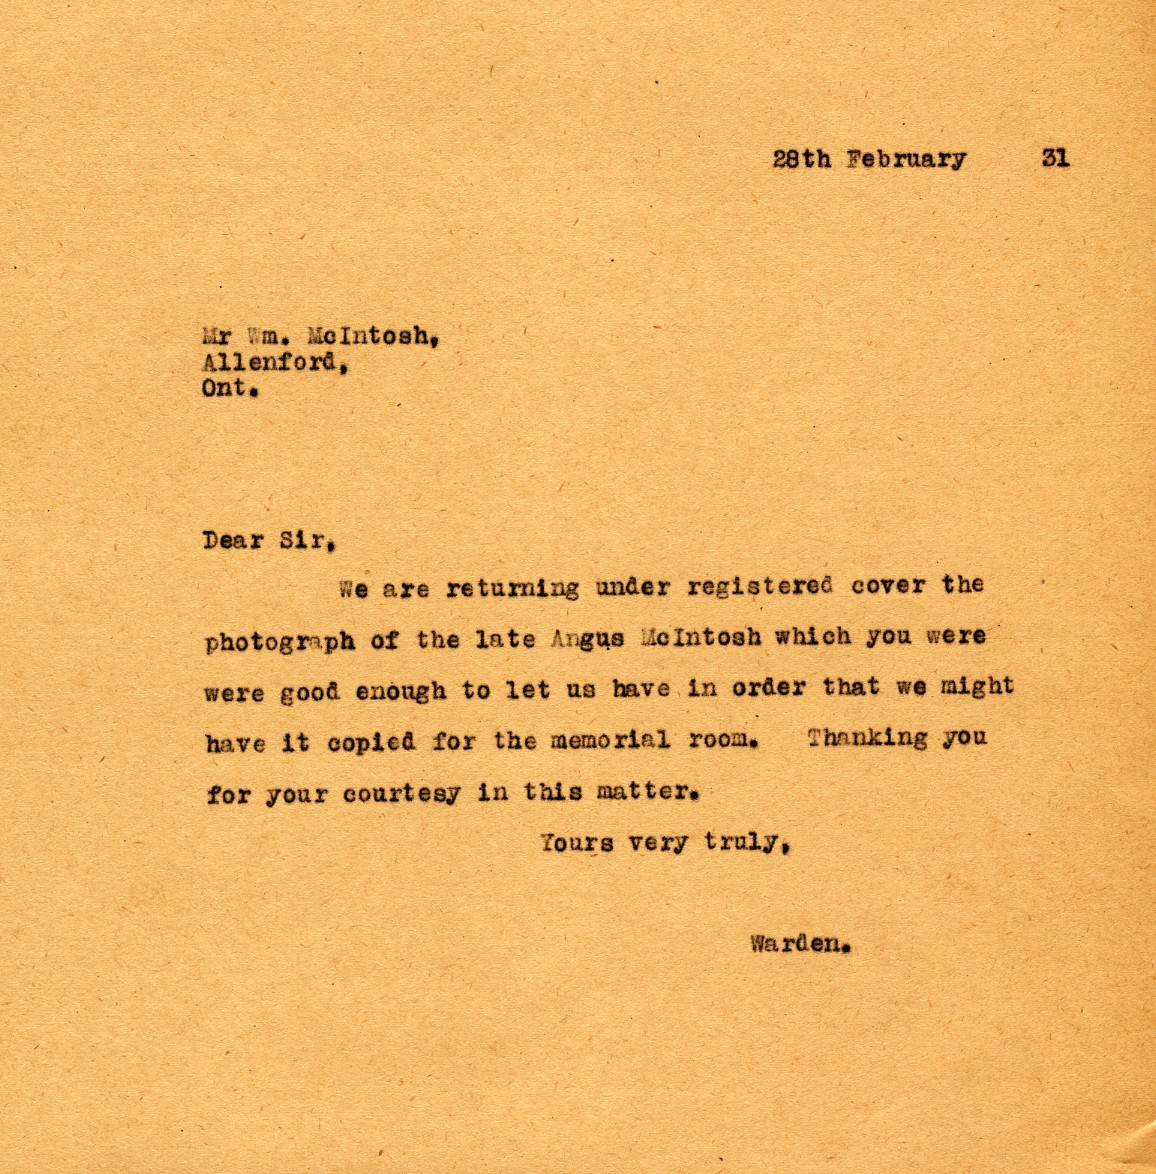 Letter from the Warden to Mr. Wm. McIntosh, 28th February 1931